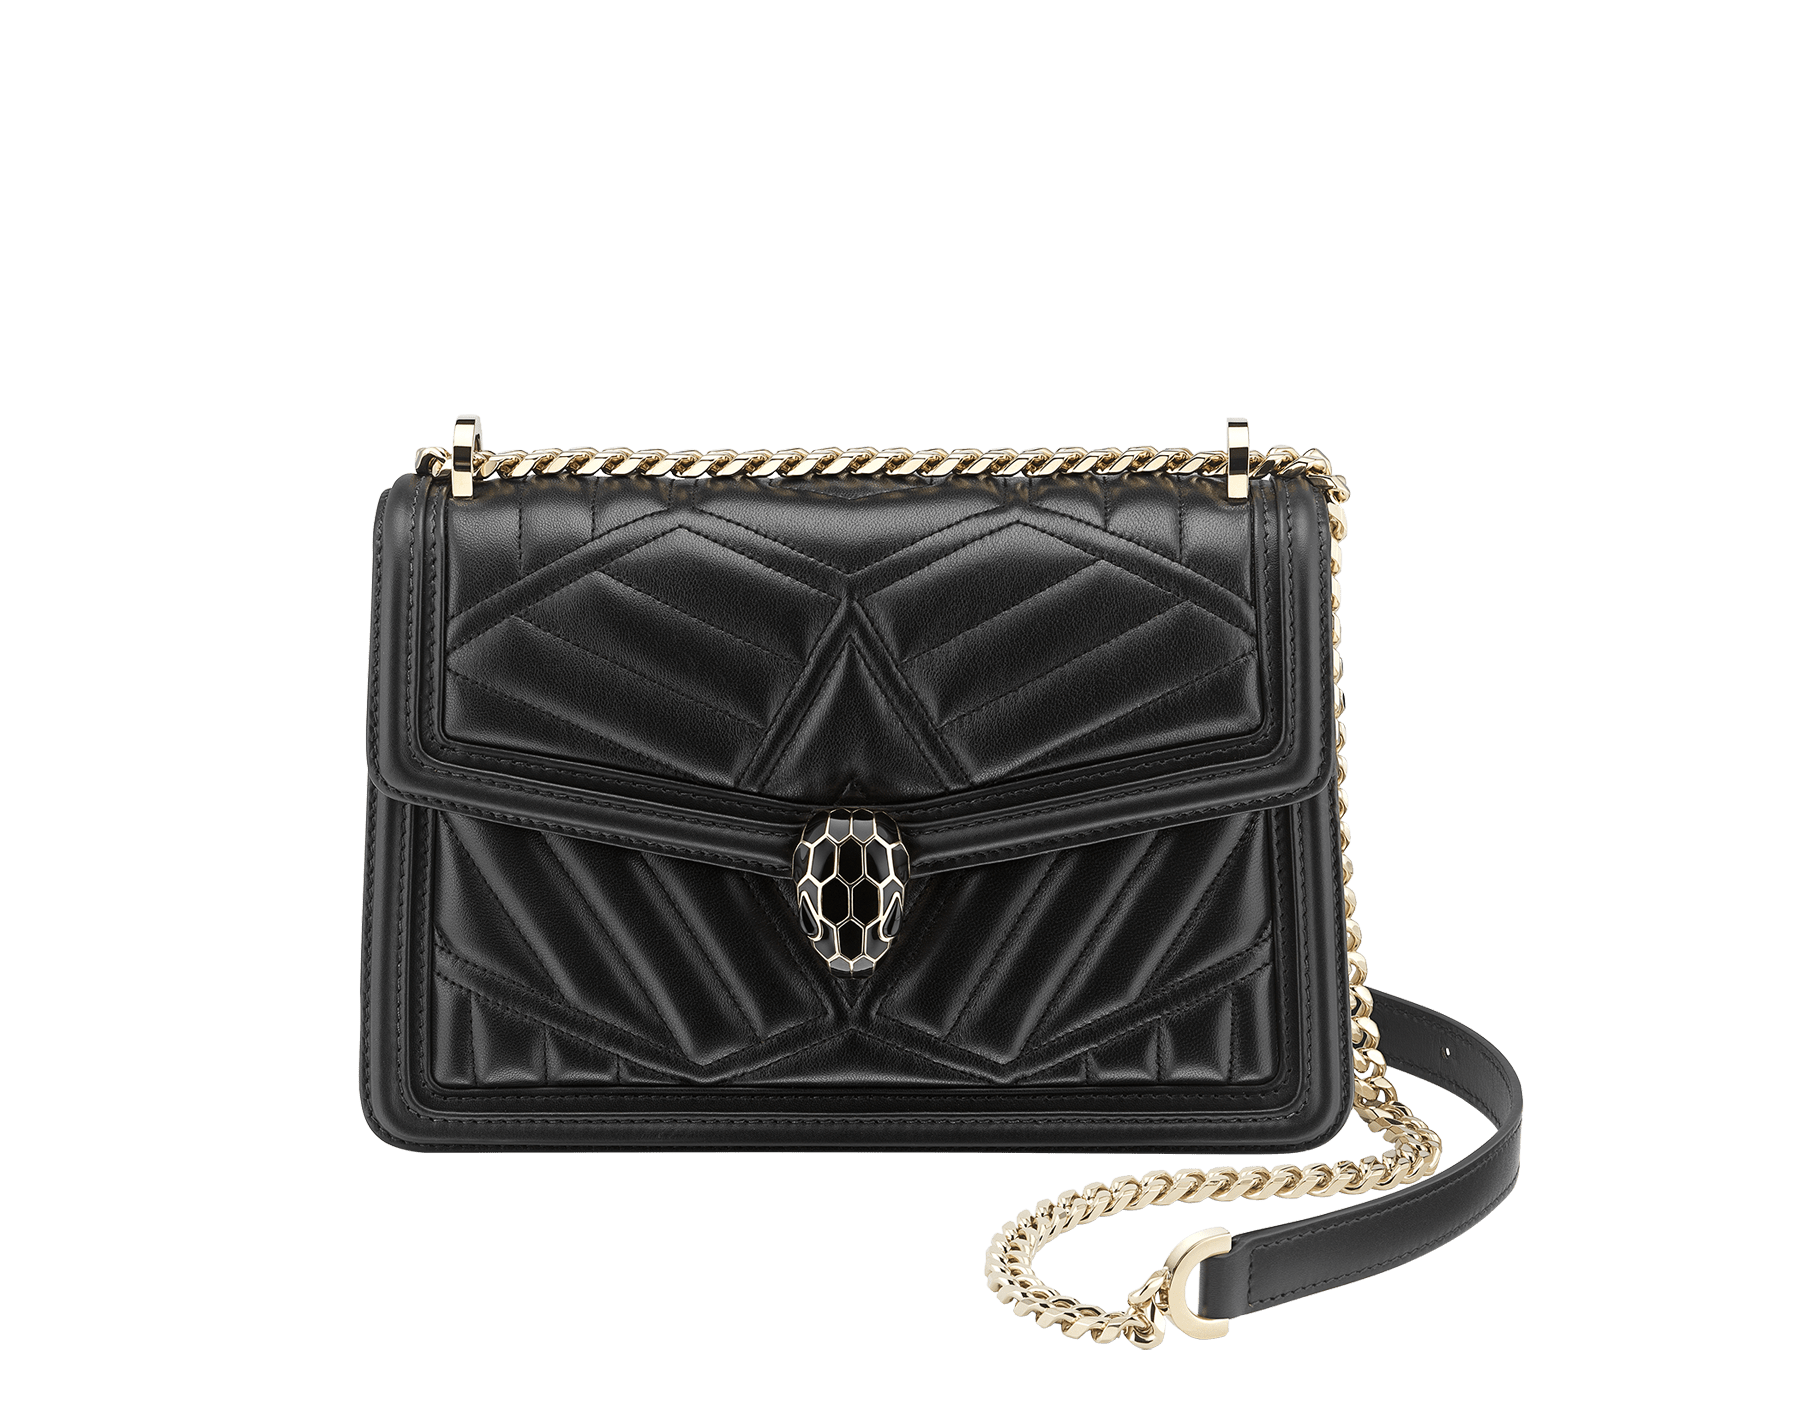 “Serpenti Diamond Blast” shoulder bag in black quilted nappa leather body, featuring a maxi matelassé pattern, and black calf leather frames, with black nappa leather internal lining. Tempting snakehead closure in light gold plated brass enriched with black enamel and black onyx eyes. 922-MFQD image 1